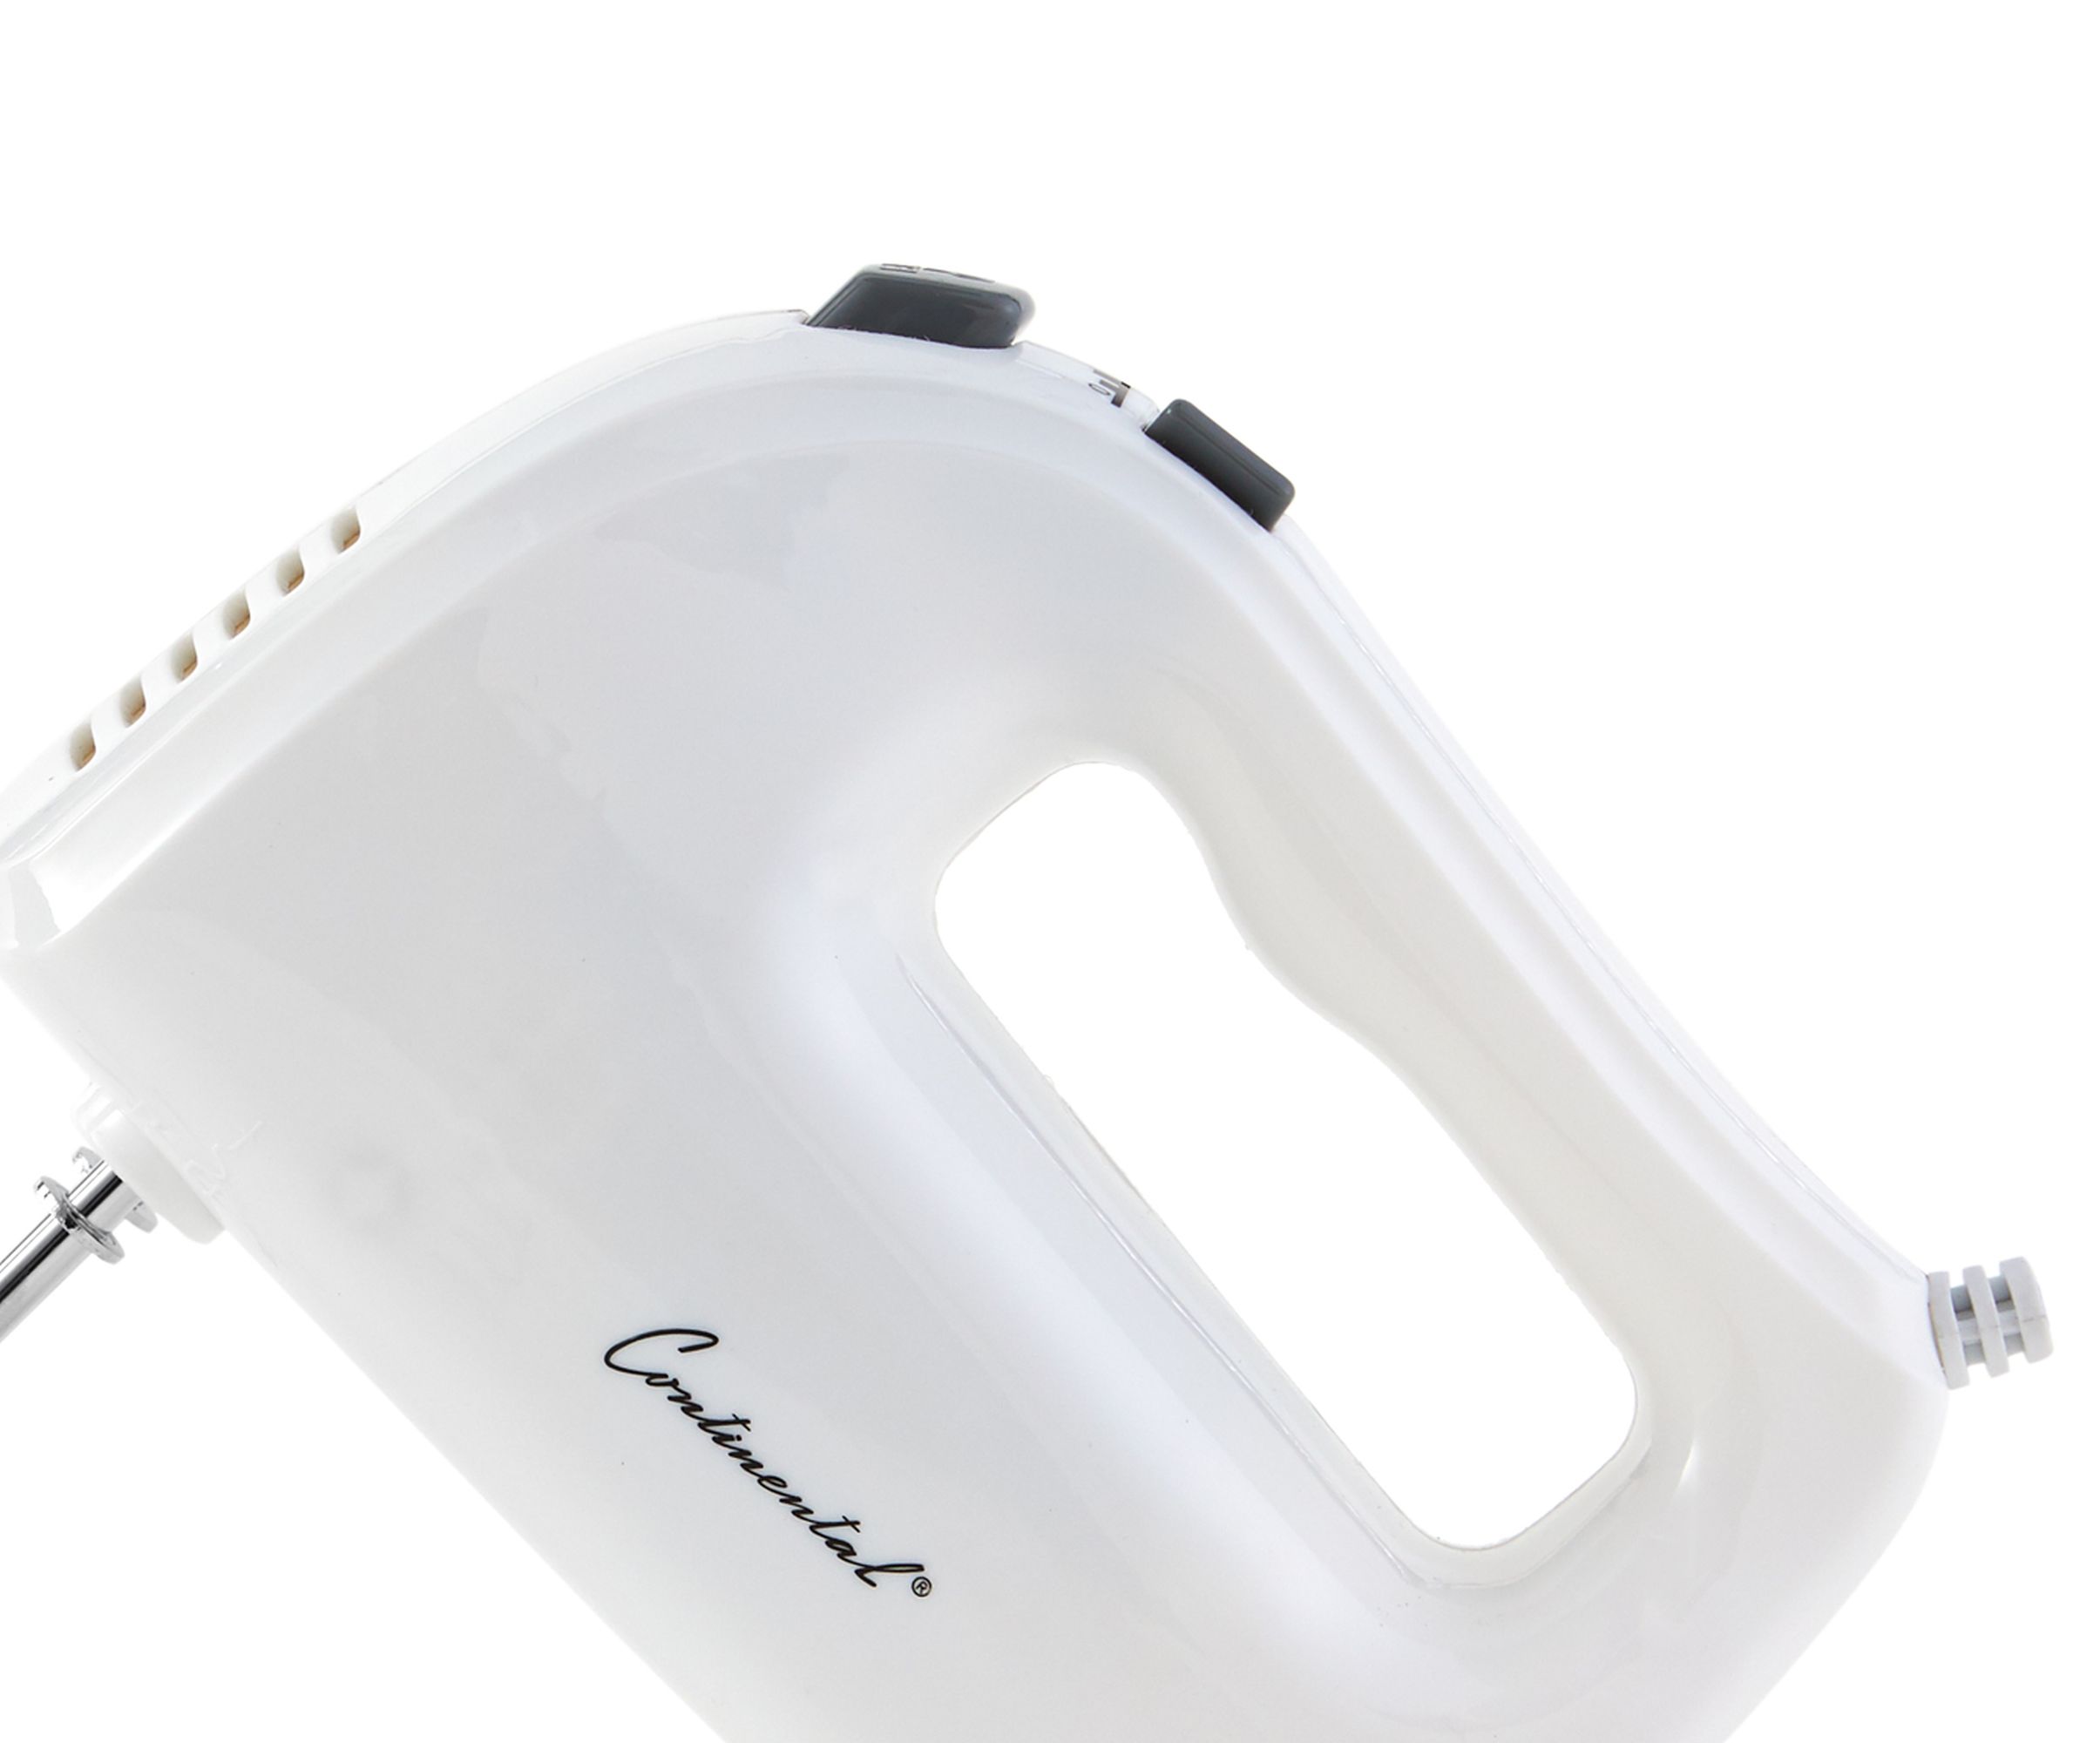 Continental Electric New 5 Speed Hand Mixer White - image 4 of 4